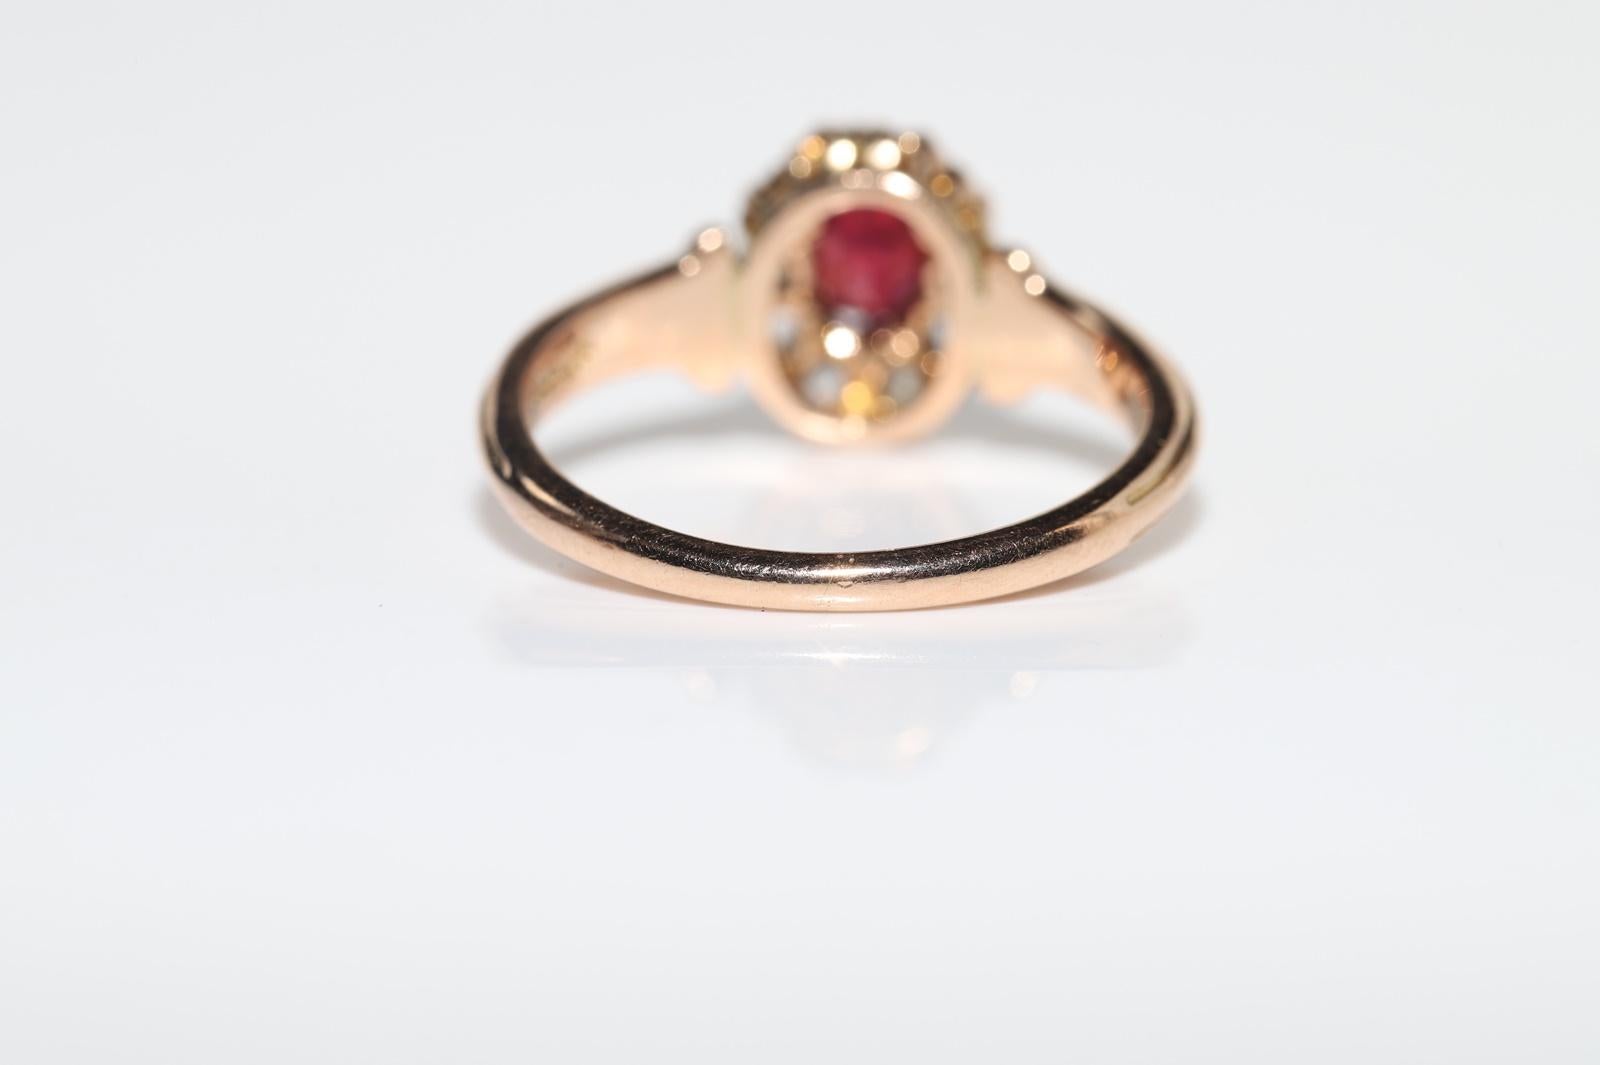 Antique Circa 1900s 14k Gold Natural Rose Cut Diamond And Ruby Decorated Ring 3